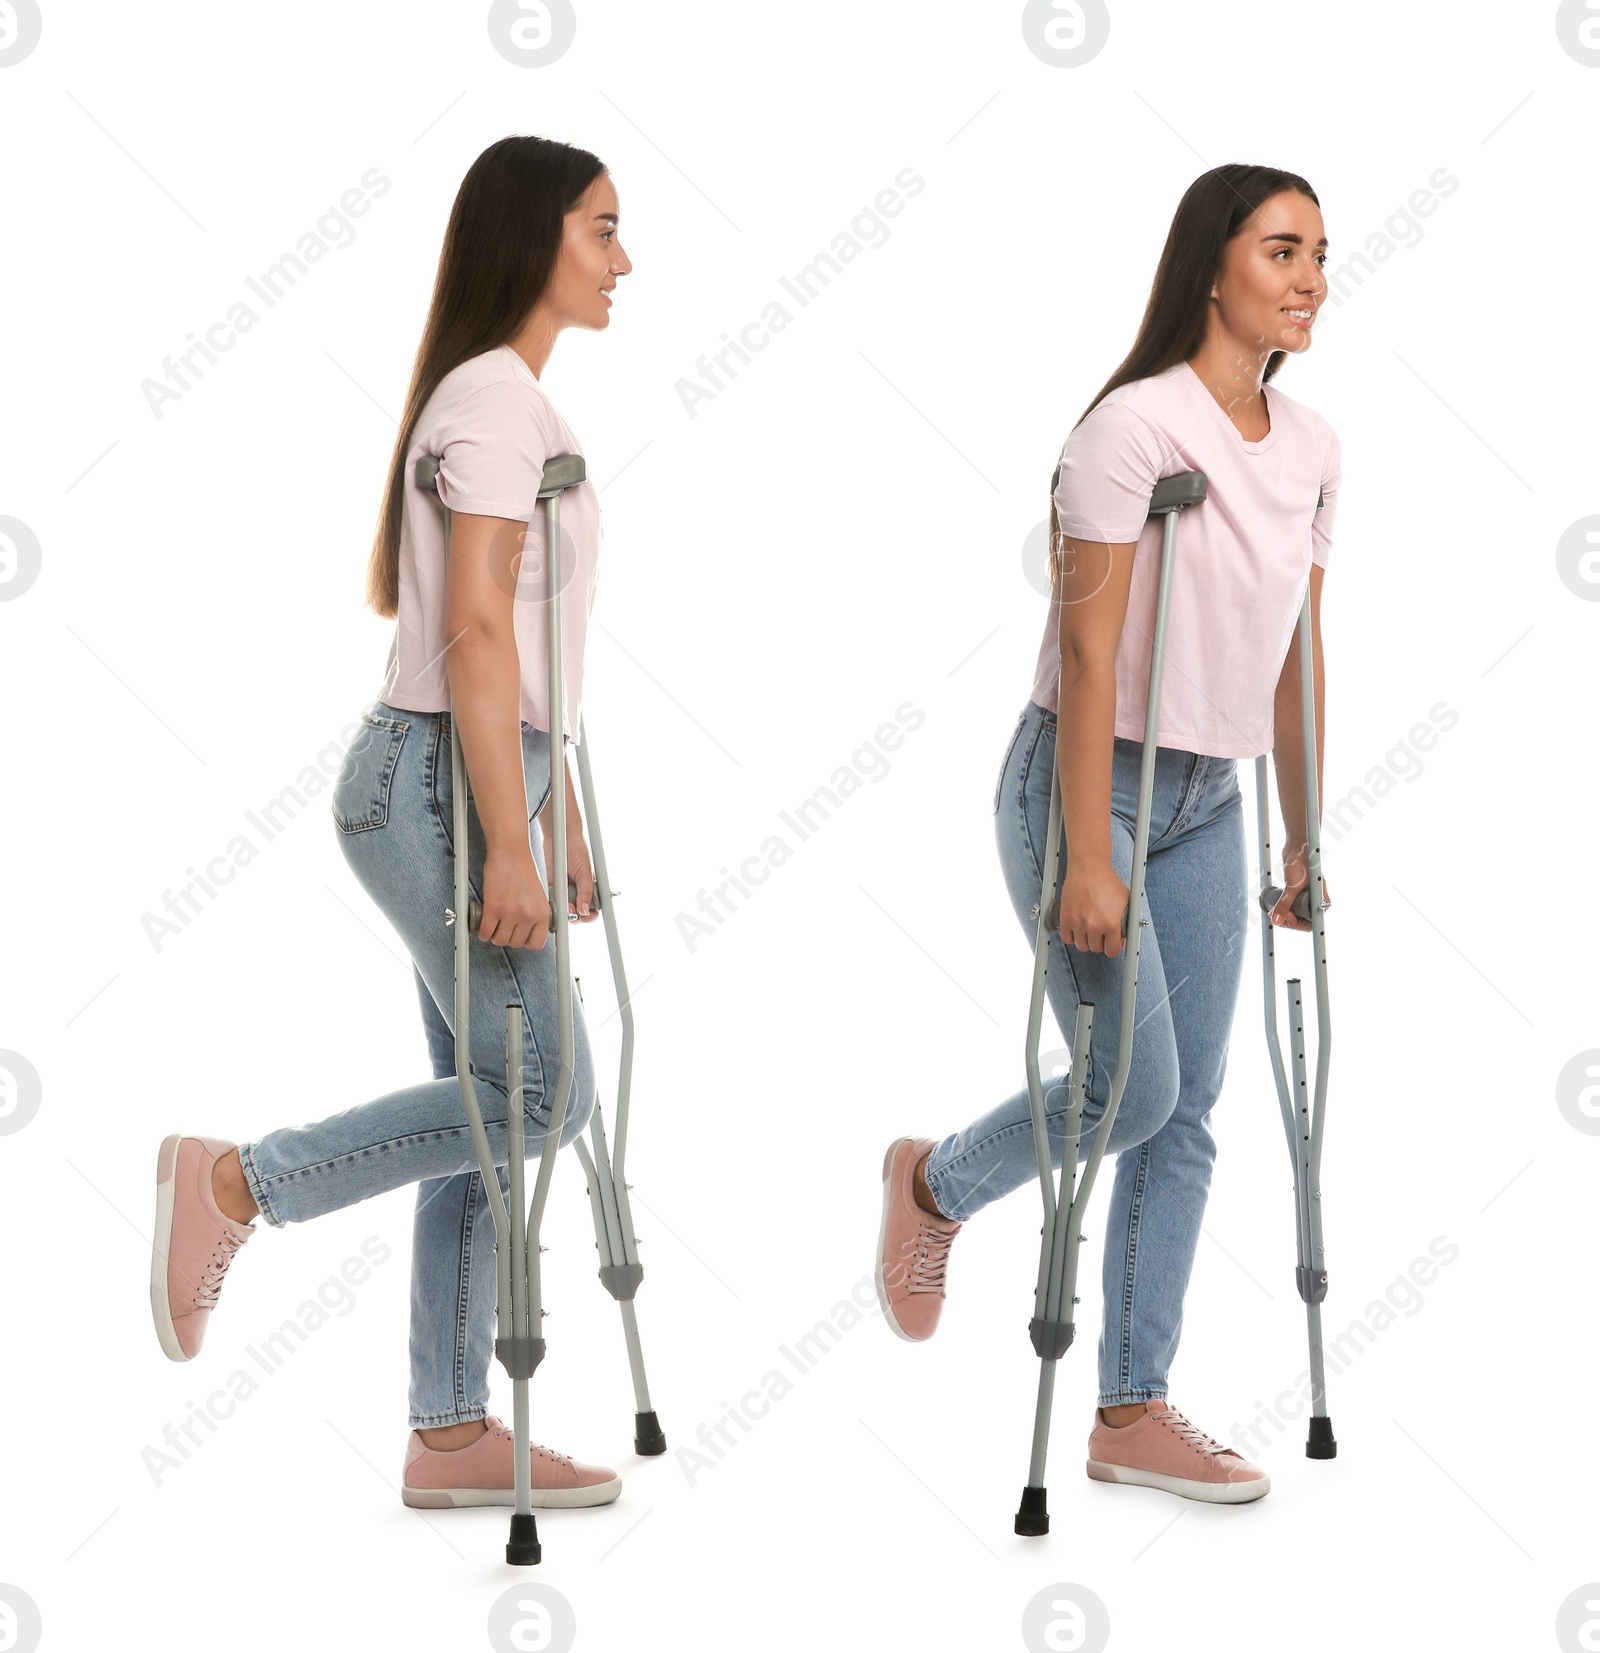 Image of Young woman with axillary crutches on white background, collage 